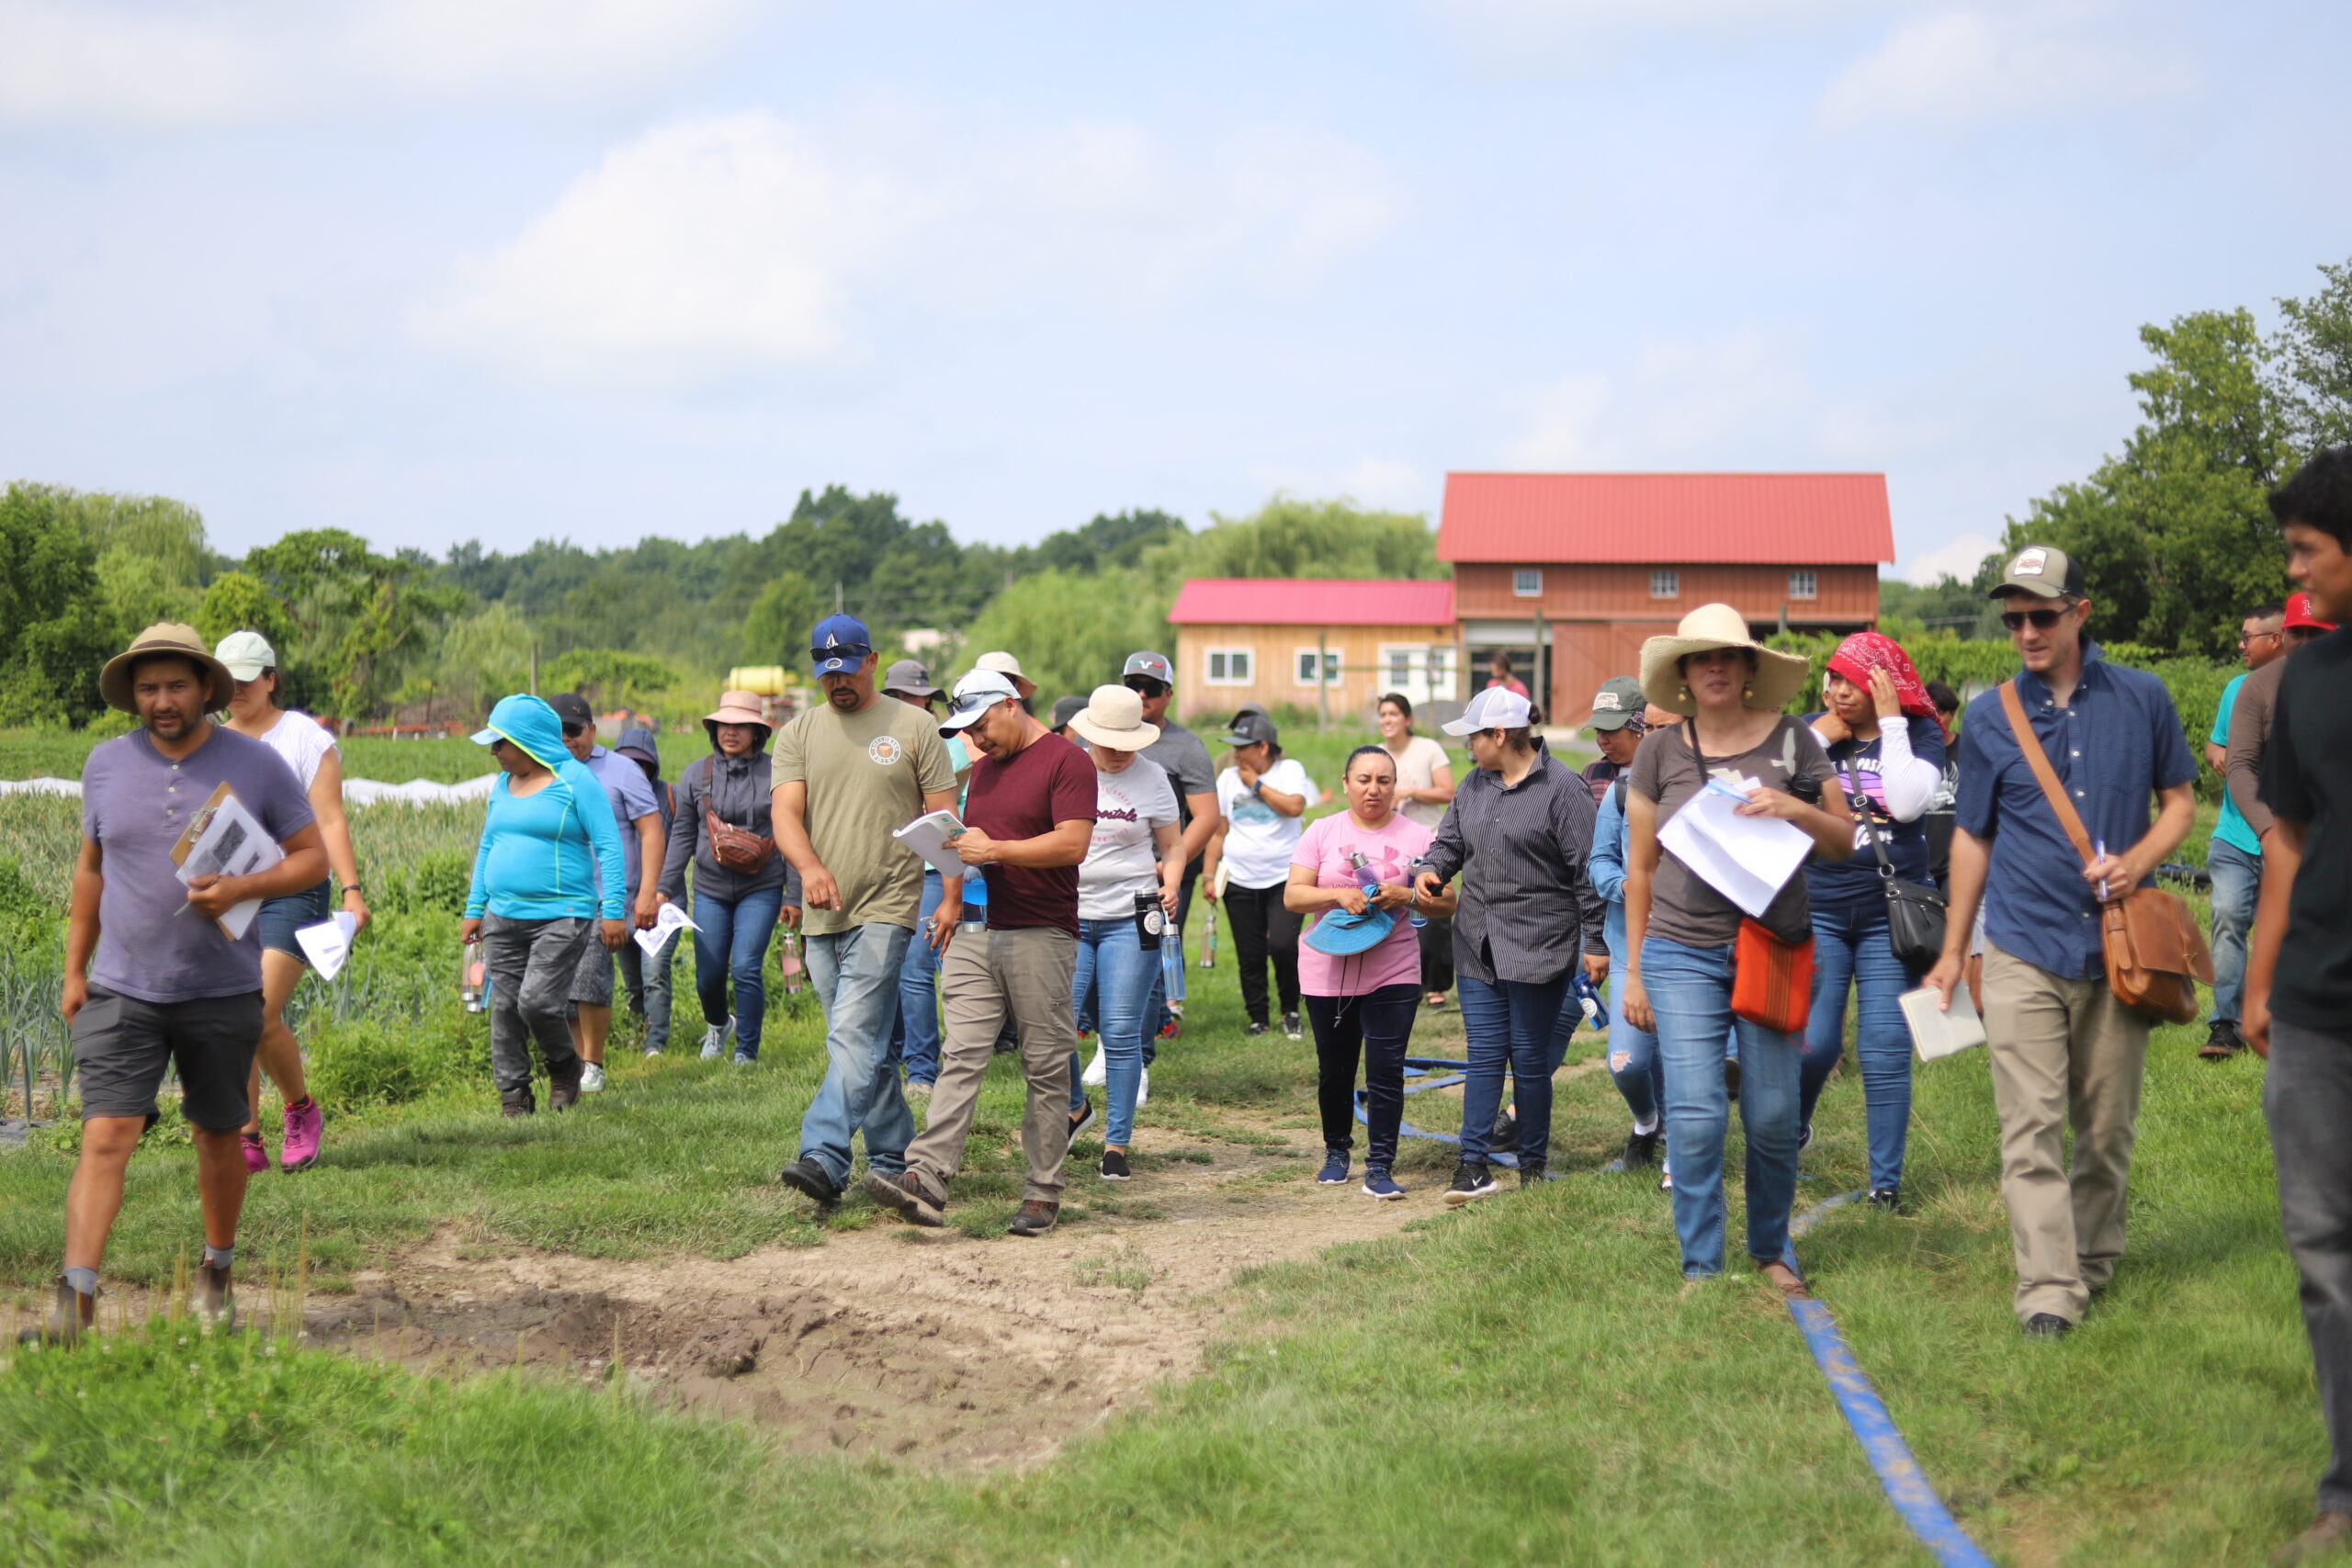 West Haven Farm hosted a group of Spanish-first farmers for a field day in Ithaca, NY.
Clara Tagliacozzo-Lee / Cornell Small Farms Program